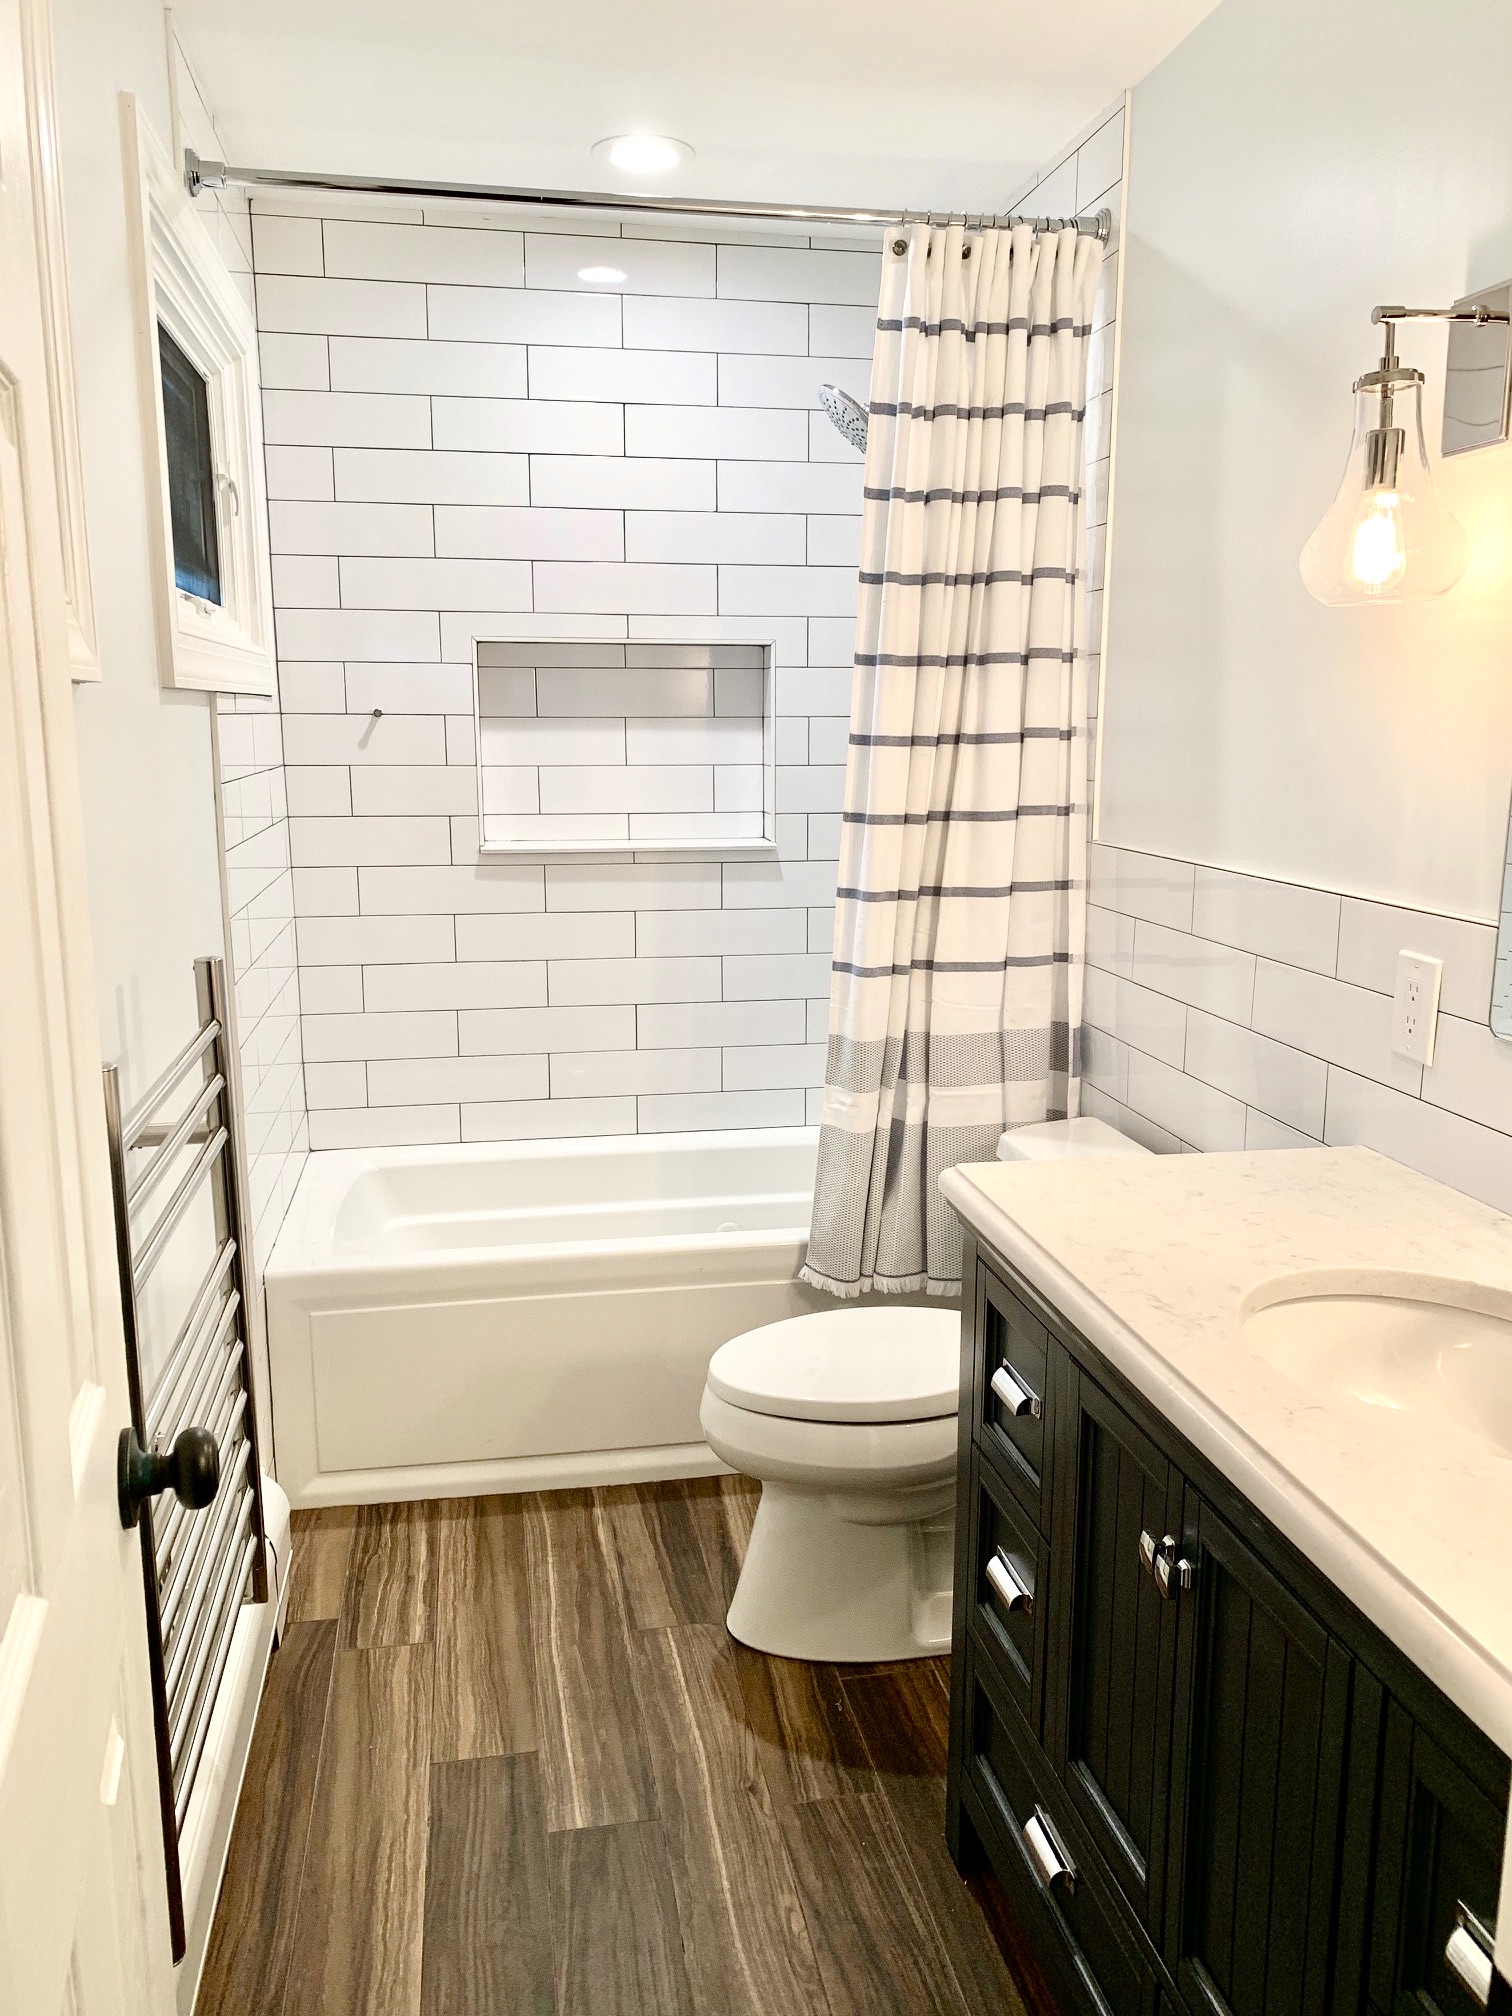 A standard bathroom remodel in a New Jersey home.